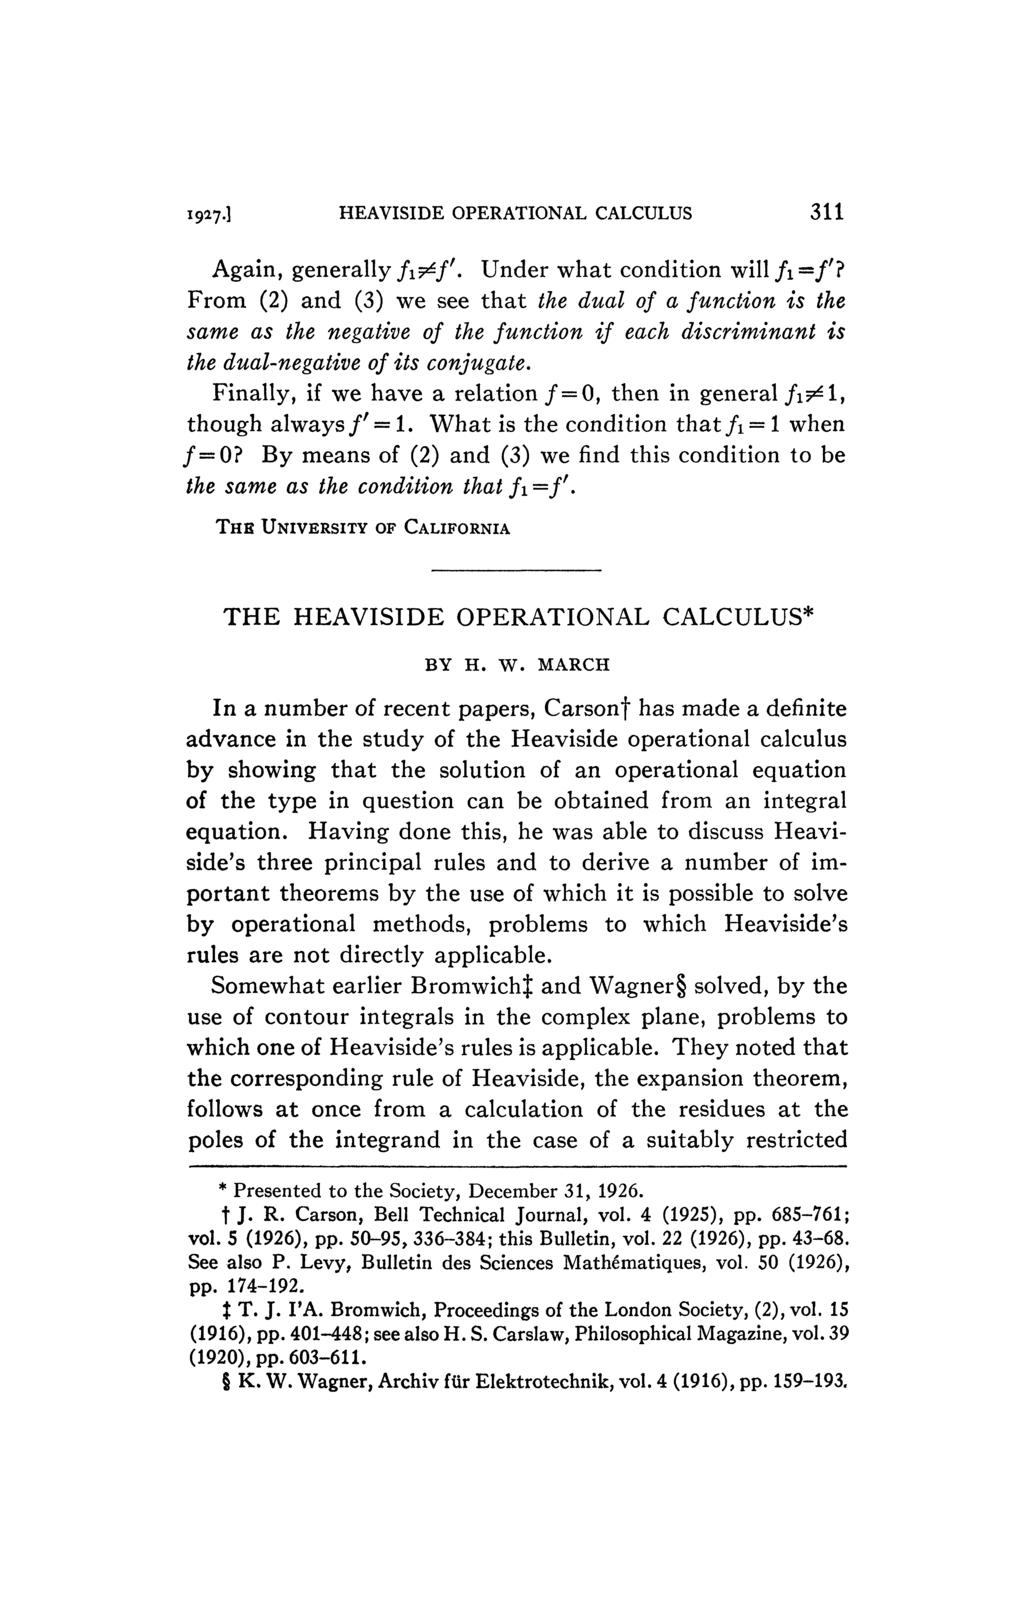 1927.I HEAVISIDE OPERATIONAL CALCULUS 311 Again, generally fit^f. Under what condition will /i /'?